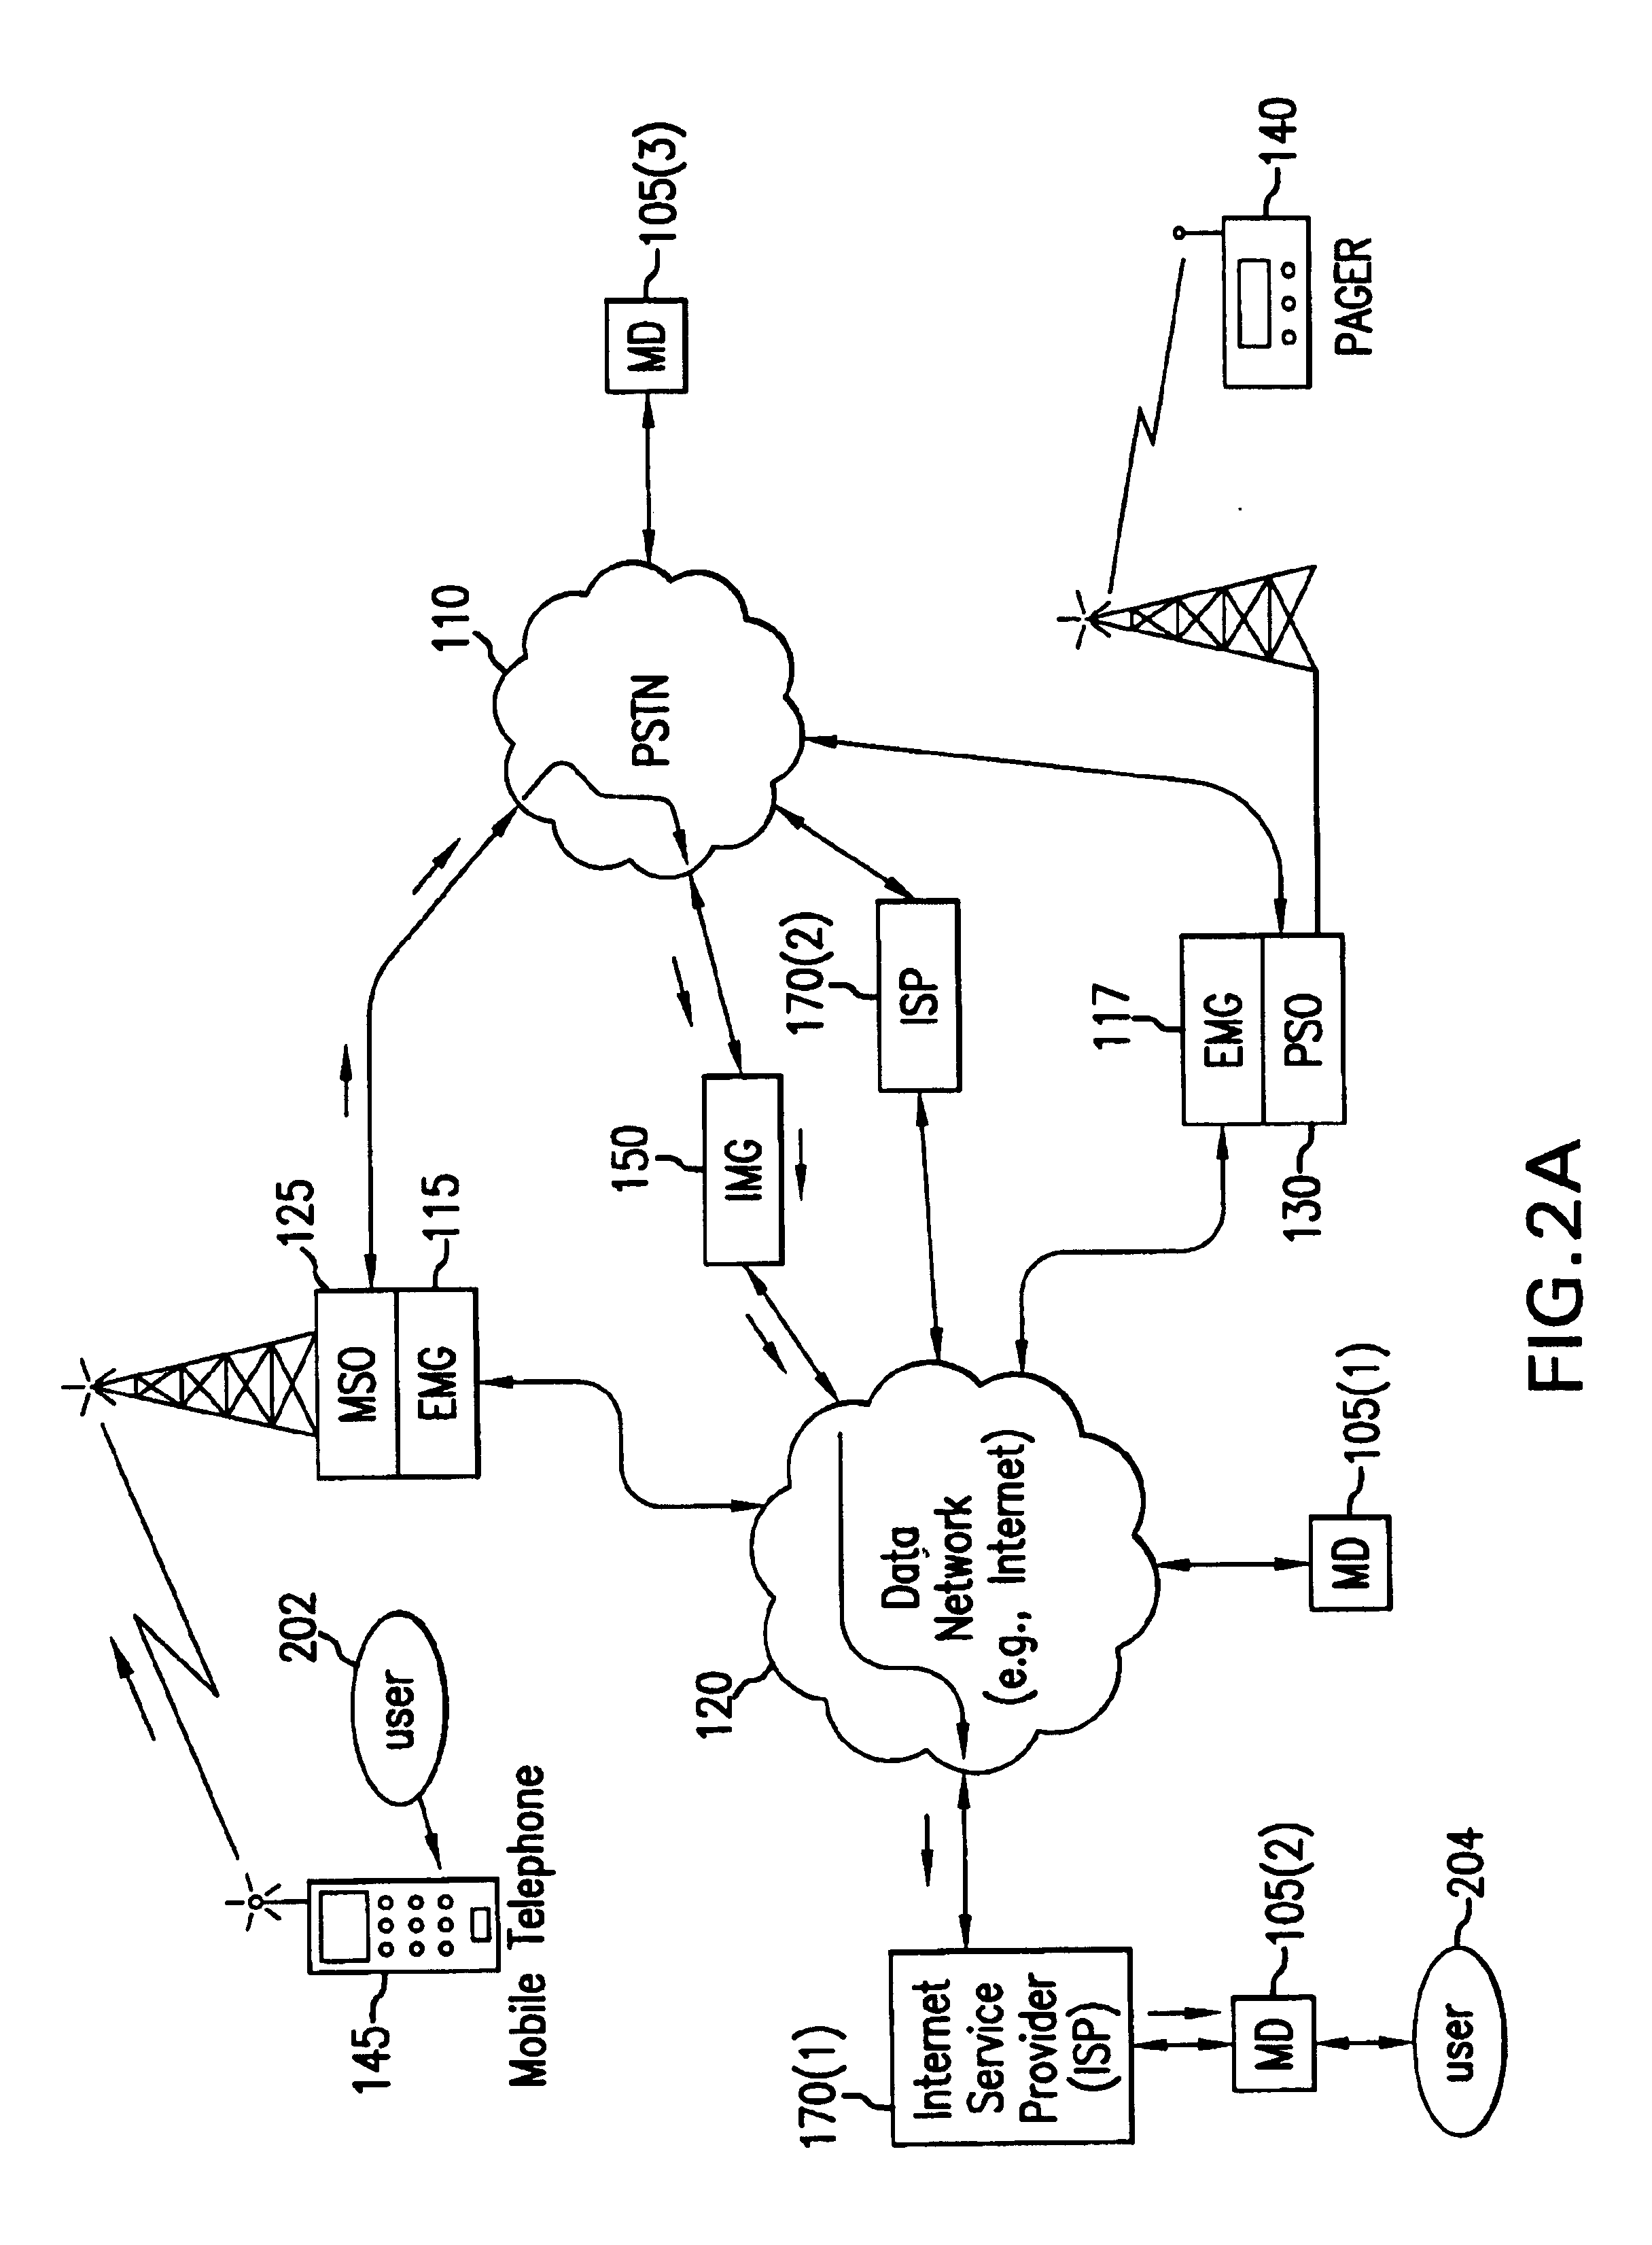 System and method for integrating audio and visual messaging